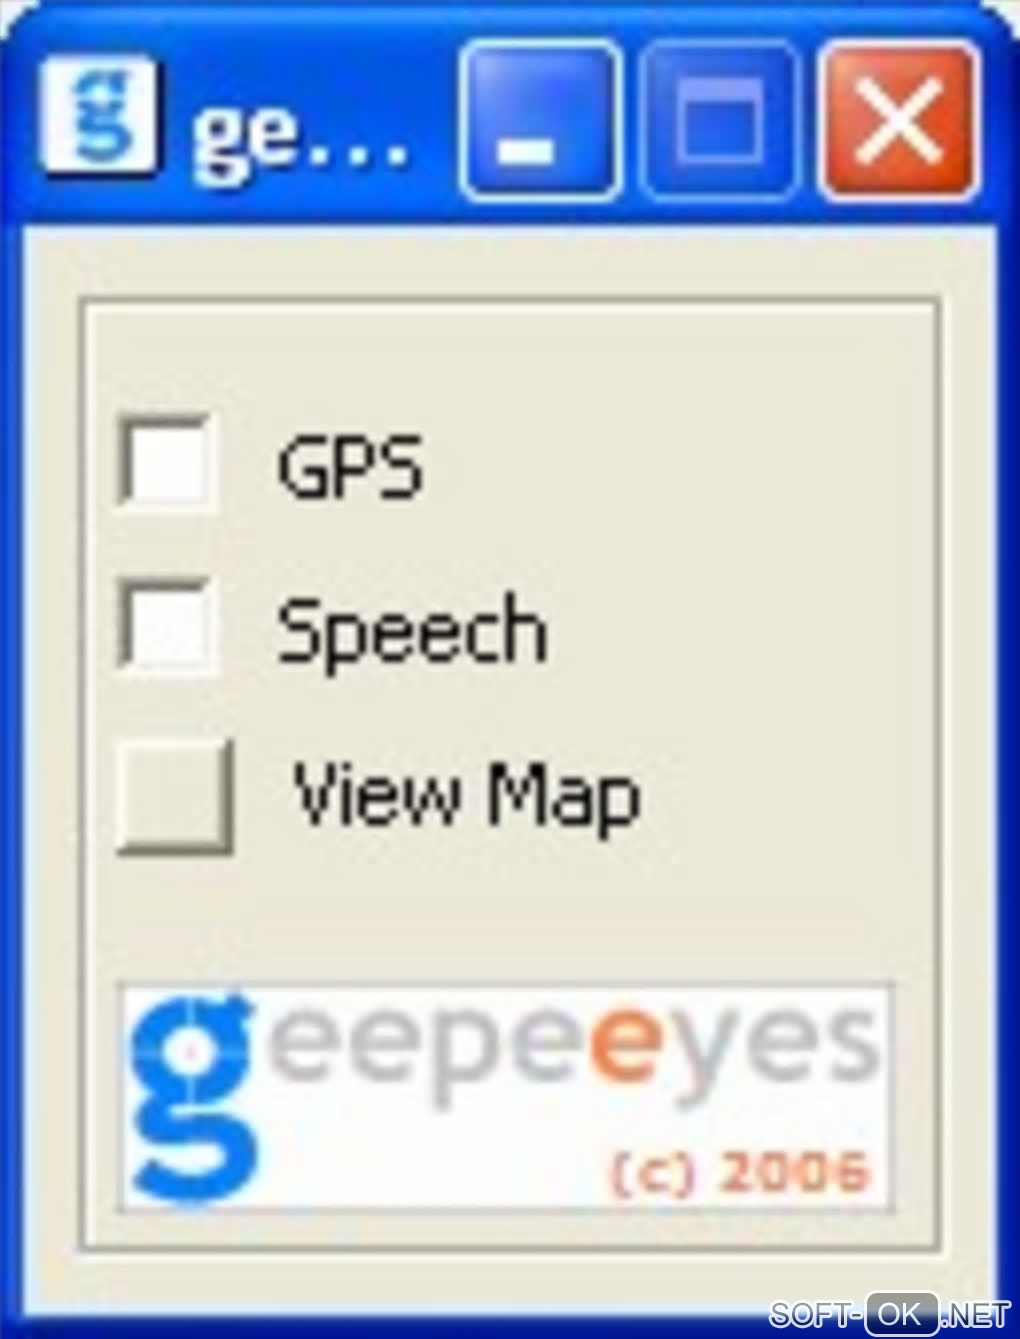 The appearance "geepeeyes"